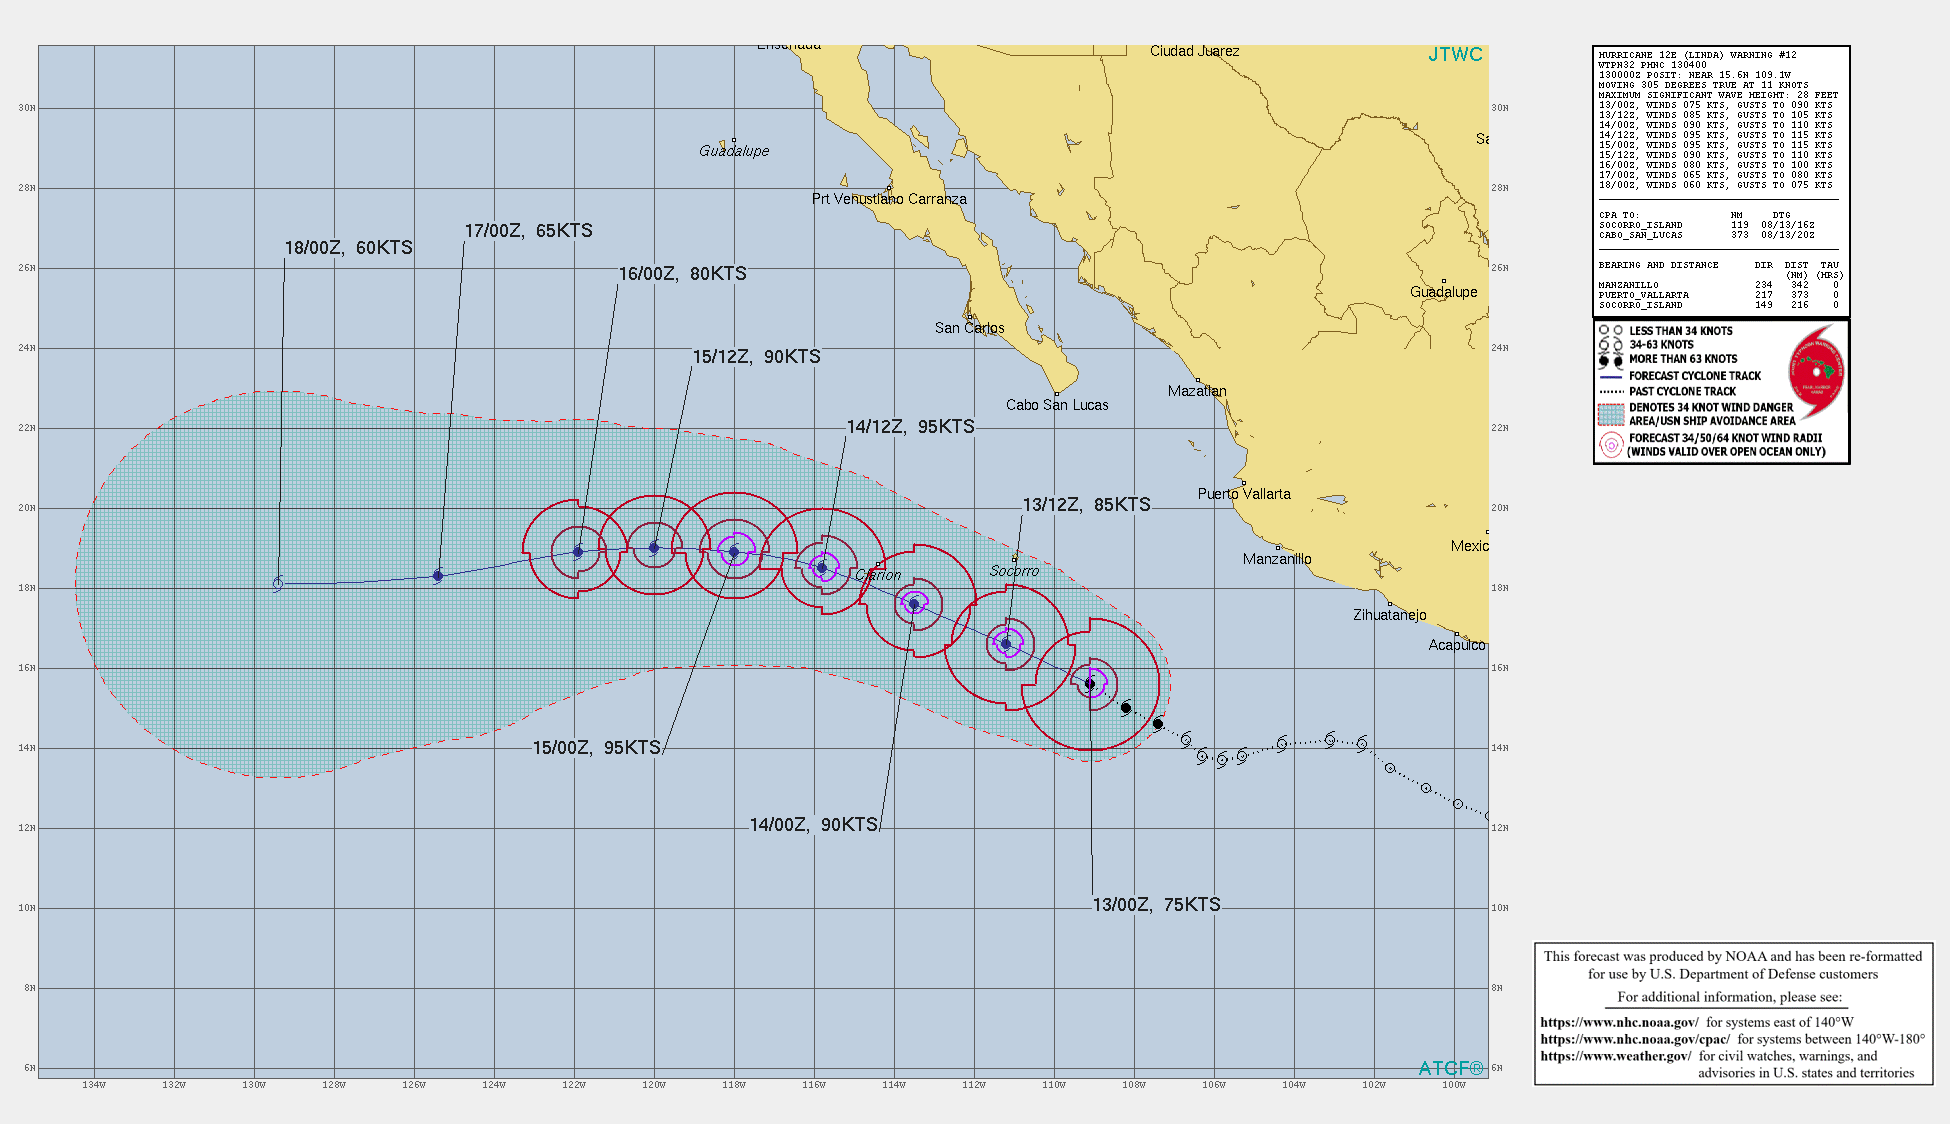 EASTERN PACIFIC. HU 12E(LINDA). WARNING 12 ISSUED AT 13/04UTC. CURRENT INTENSITY IS 75KNOTS/CAT 1 AND IS FORECAST TO PEAK AT 95KNOTS/CAT 2 BY 14/12UTC.